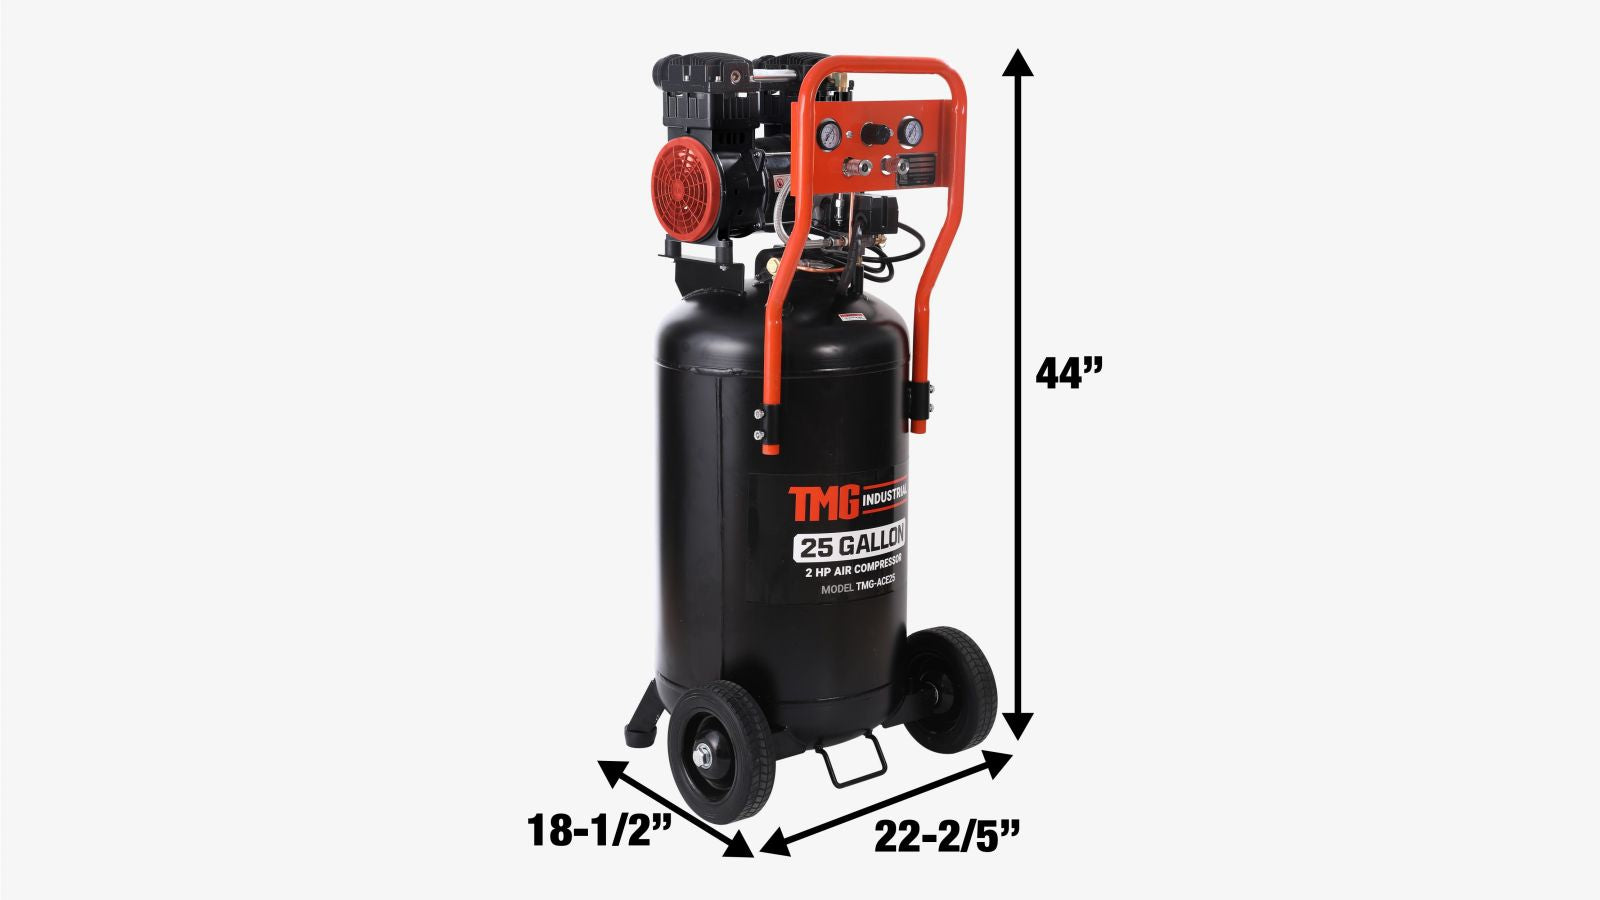 TMG Industrial 25 Gallon 2 HP Electric Air Compressor, Oil-Free Dual Piston Pump, 5 Min Fill Time, ASME Vertical Tank, TMG-ACE25-specifications-image